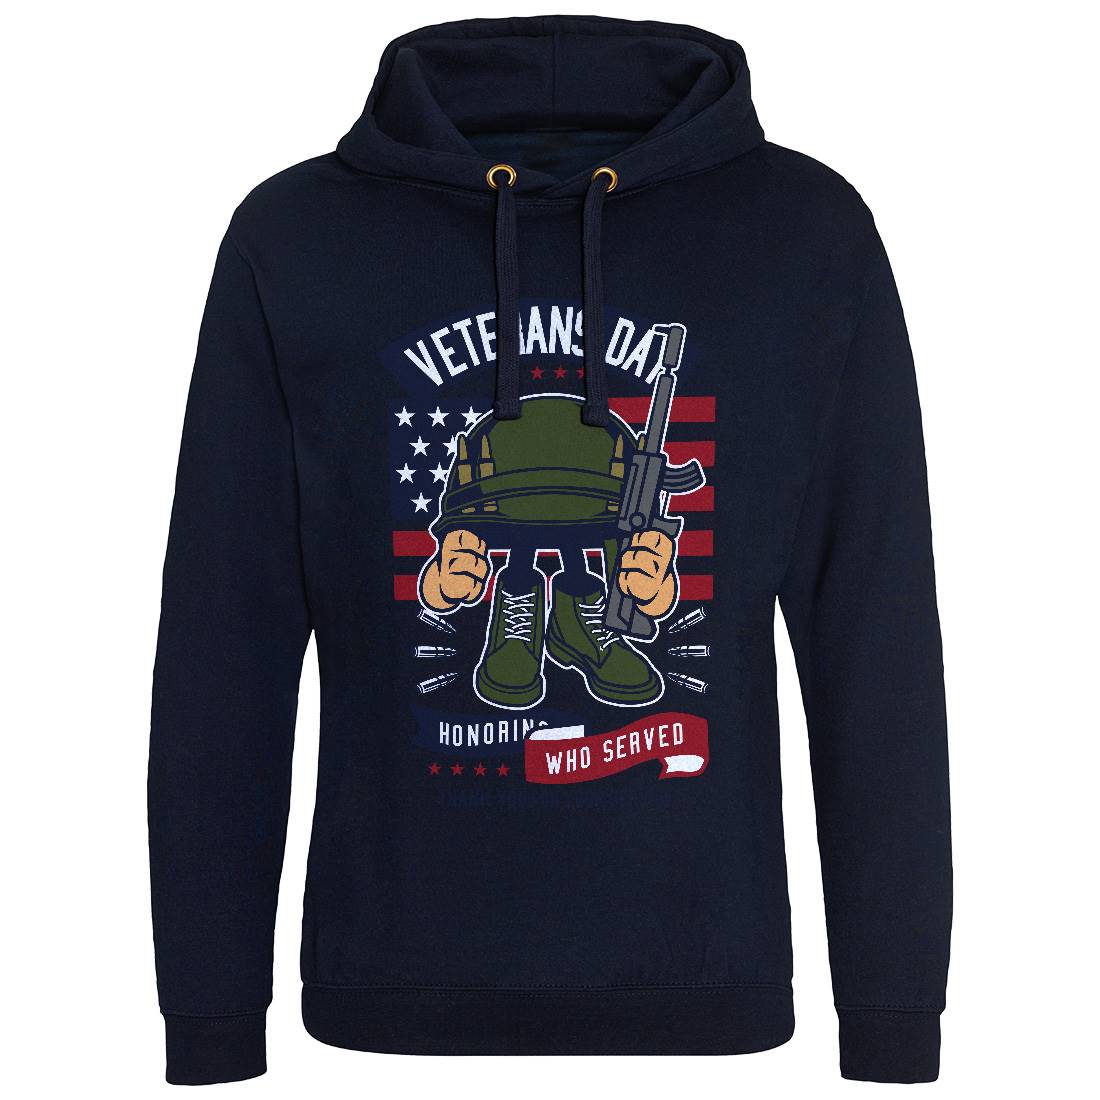 Veterans Day Mens Hoodie Without Pocket Army C686